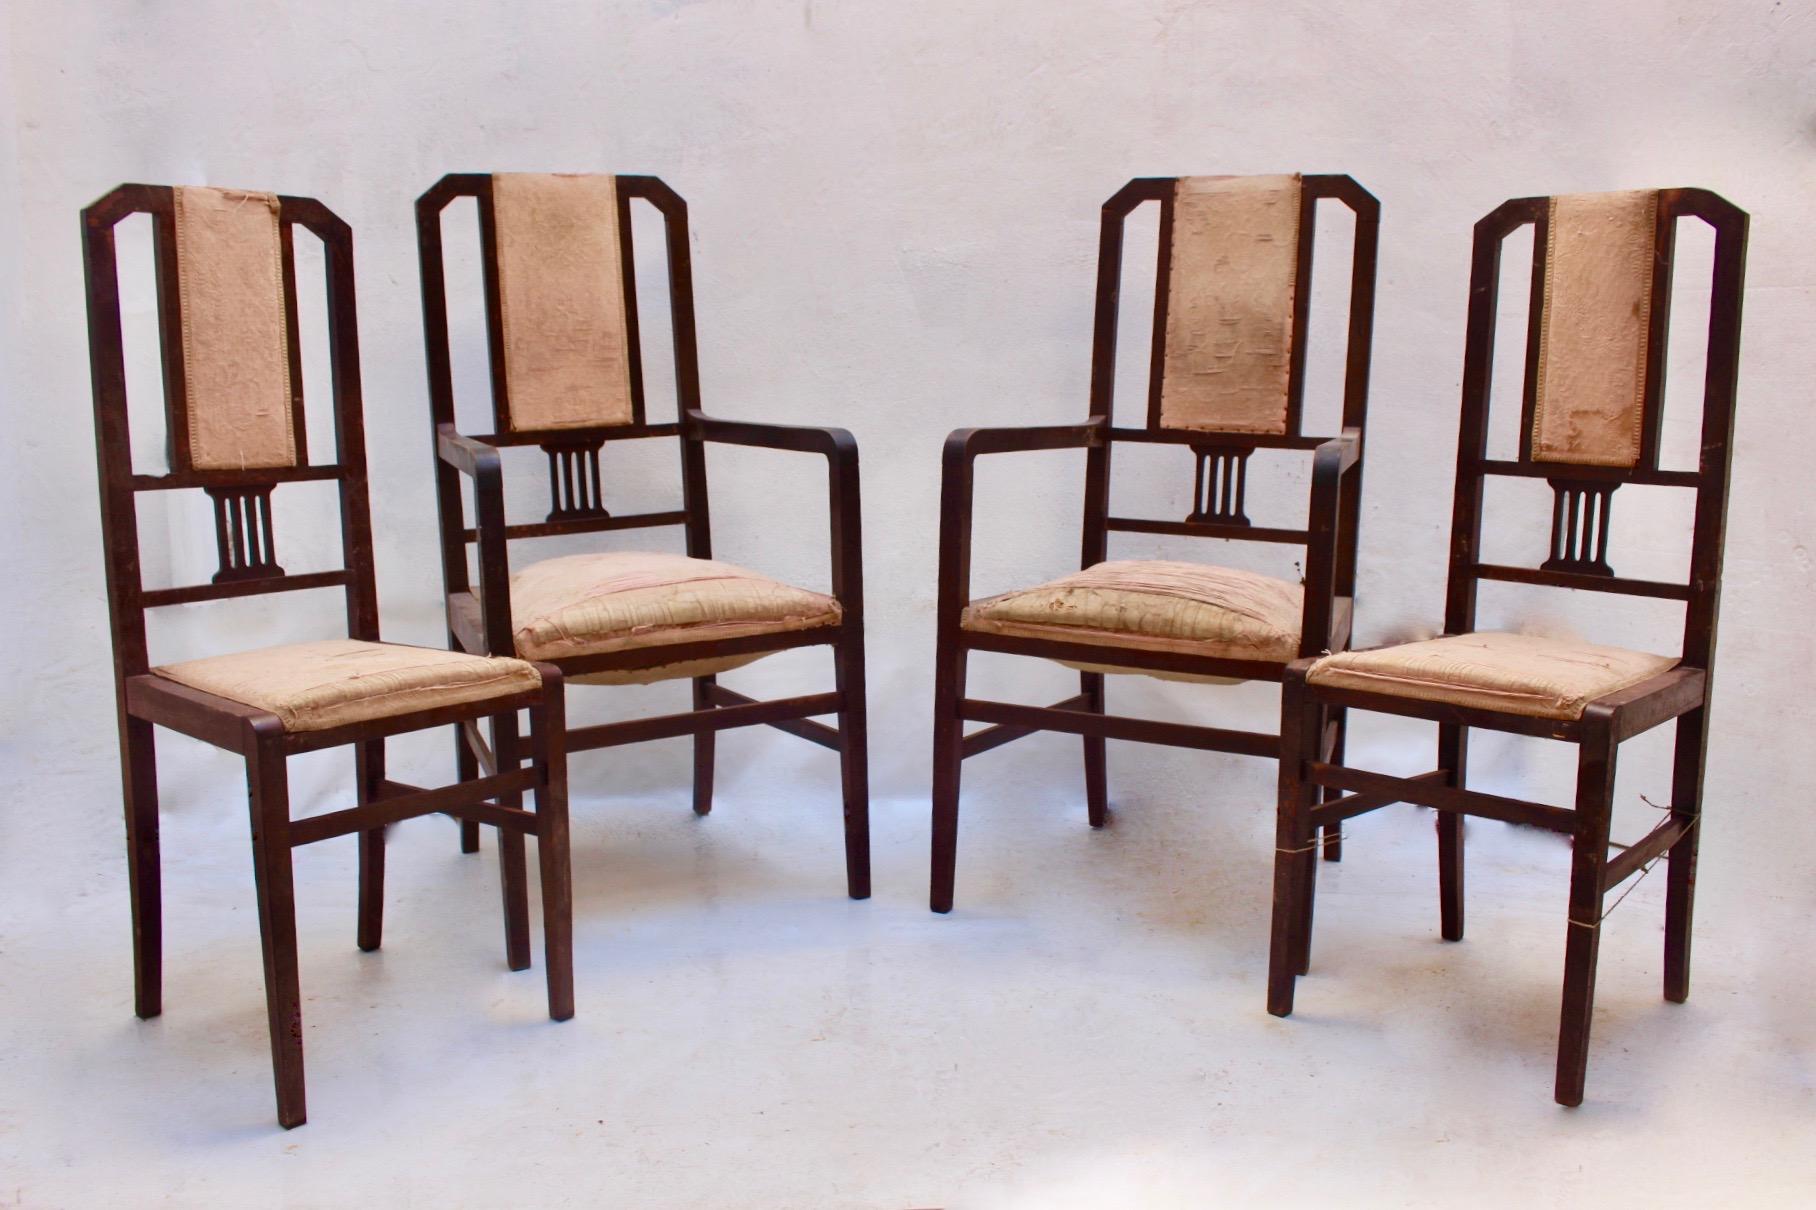 Art Deco Beech Living Room Set Settee and 4 Chairs, Spain, 1930s For Sale 3